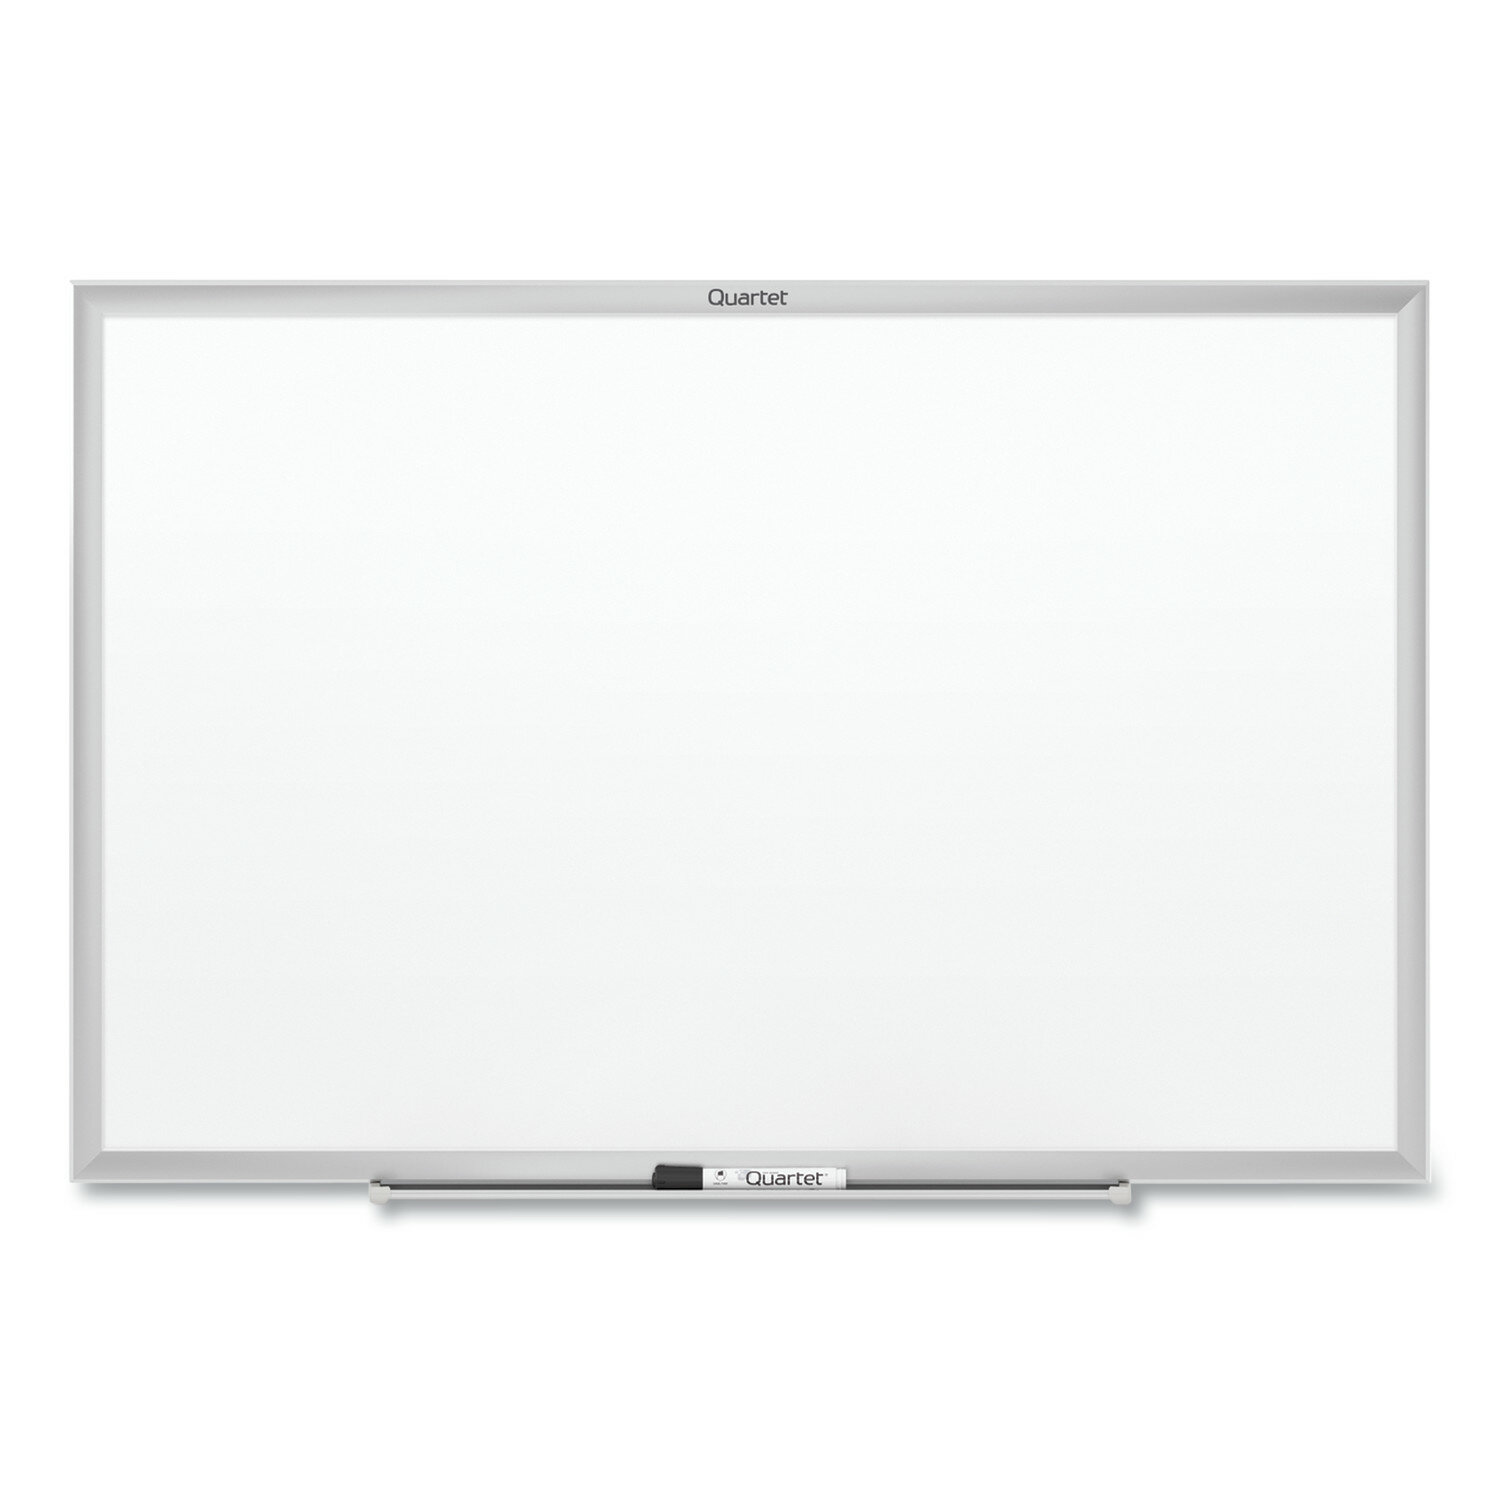 450 mm, 300 mm Maul 6451084 Plastic Whiteboard Magnetic Whiteboards 